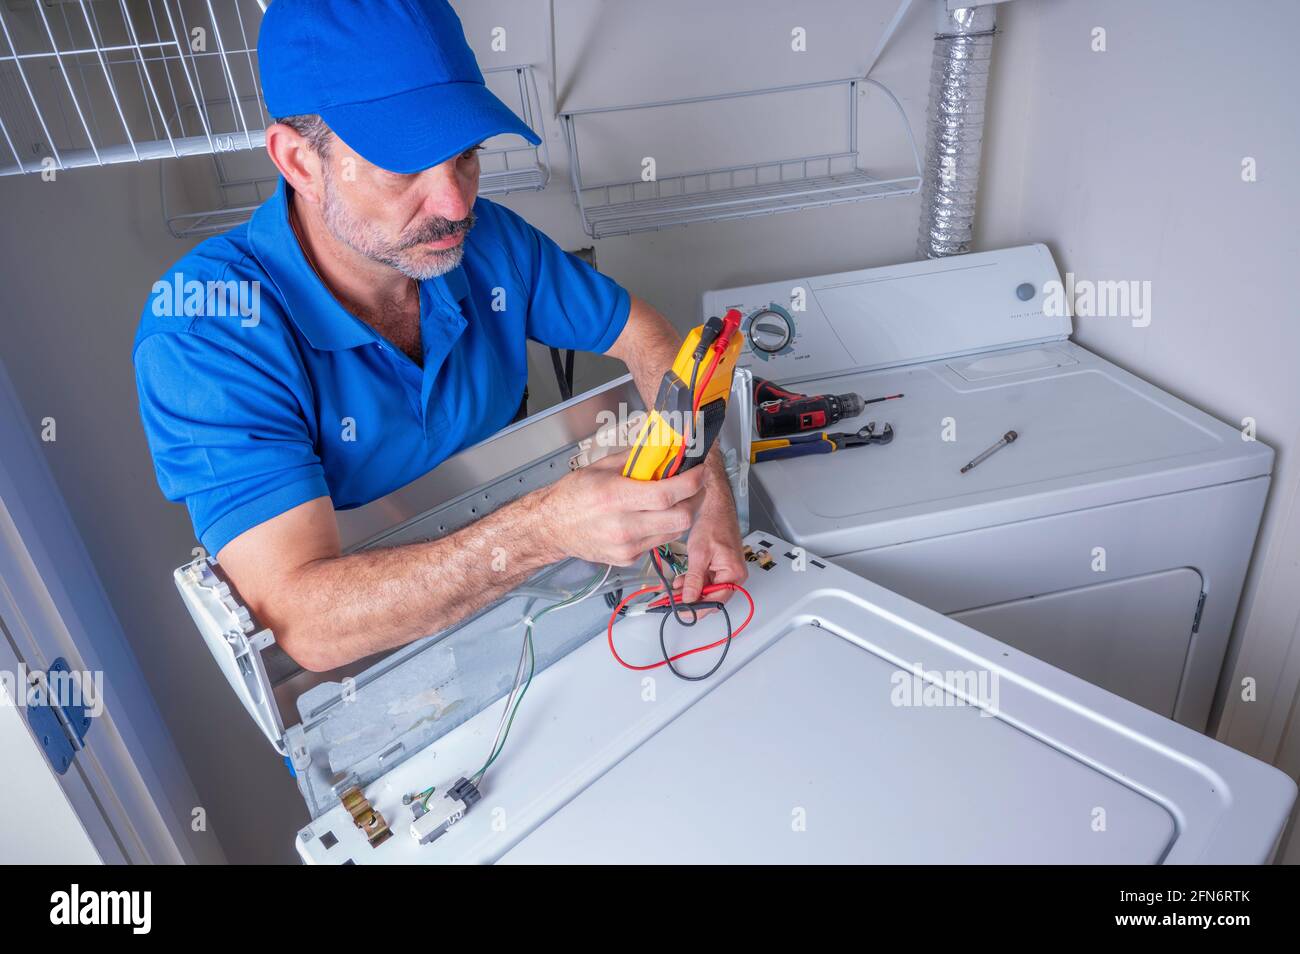 Appliance technician wearing a blue uniform testing circuits on a washing machine, looking at the volt meter Stock Photo